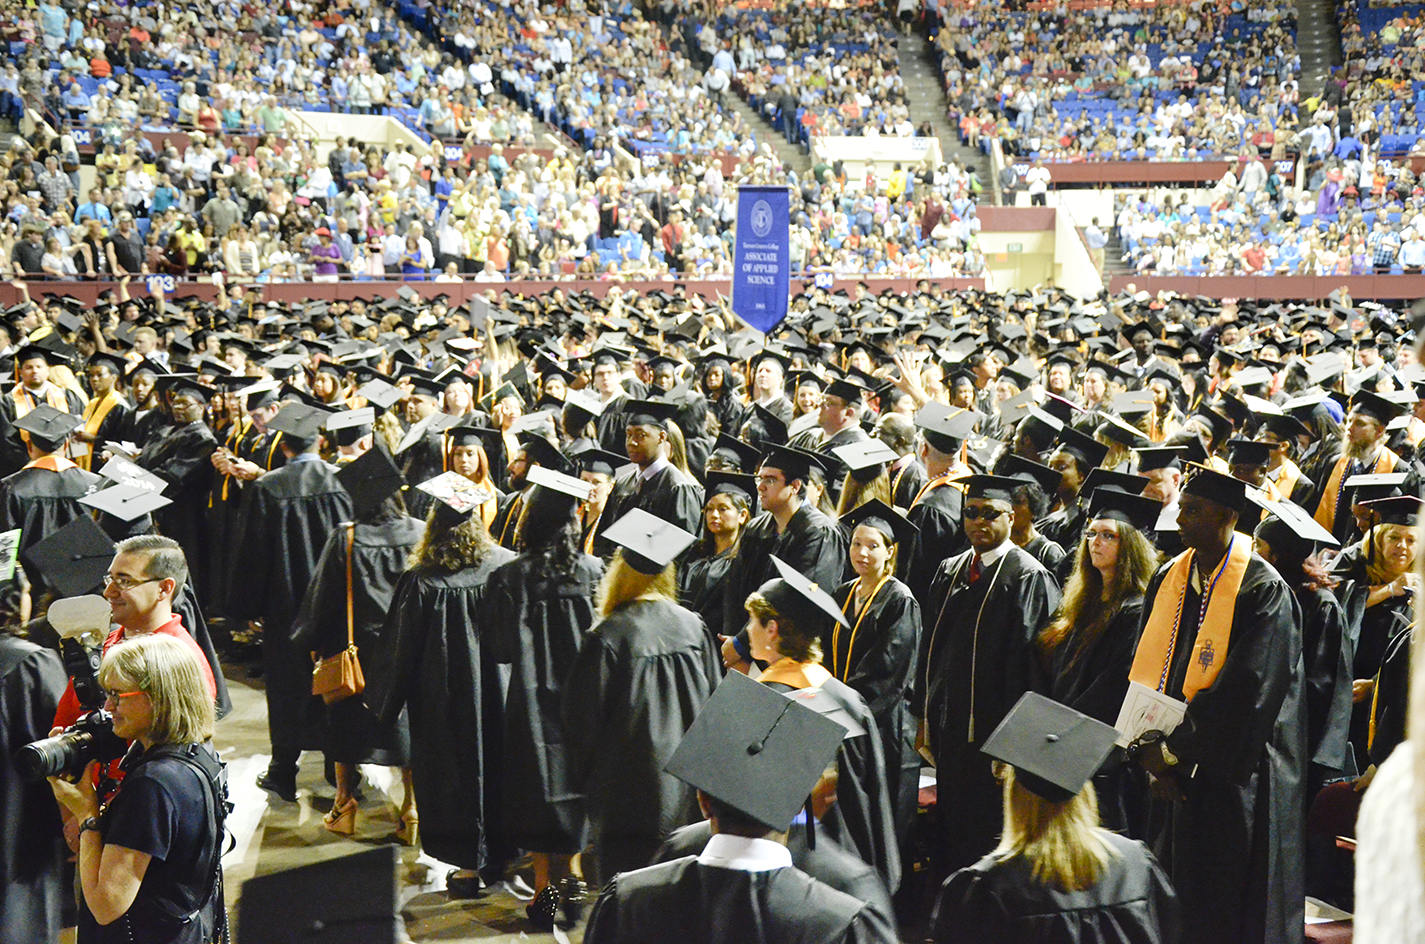 About 2,000 TCC students are expected to participate in two commencement ceremonies May 12 at Fort Worth Convention Center, up from last year’s 1,750 graduates.